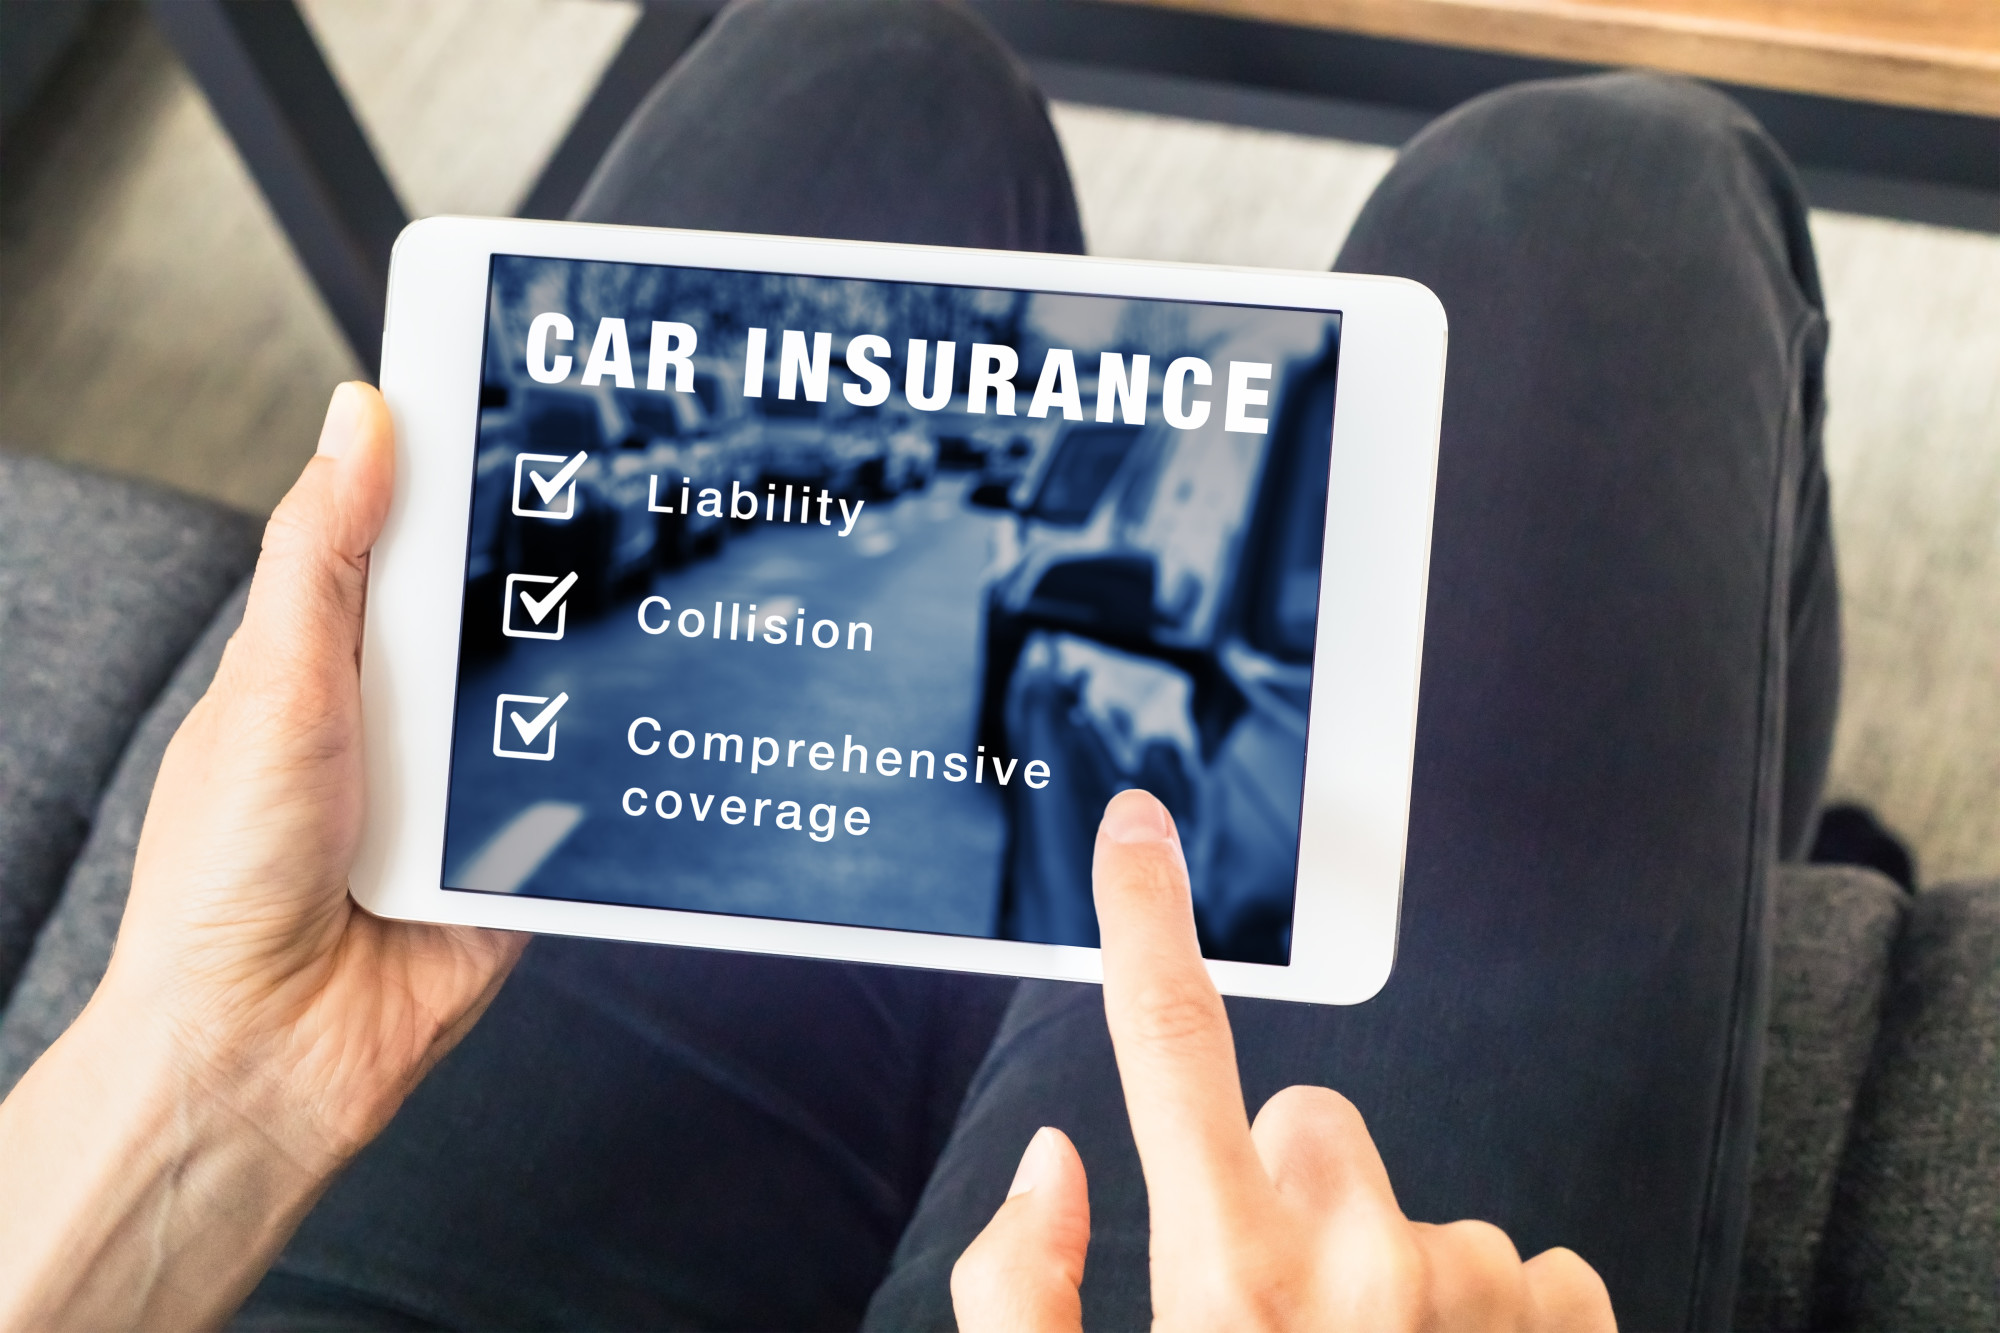 Person choosing car insurance coverage options (liability, collision, comprehensive) on website on digital tablet computer screen, vehicle and risk protection